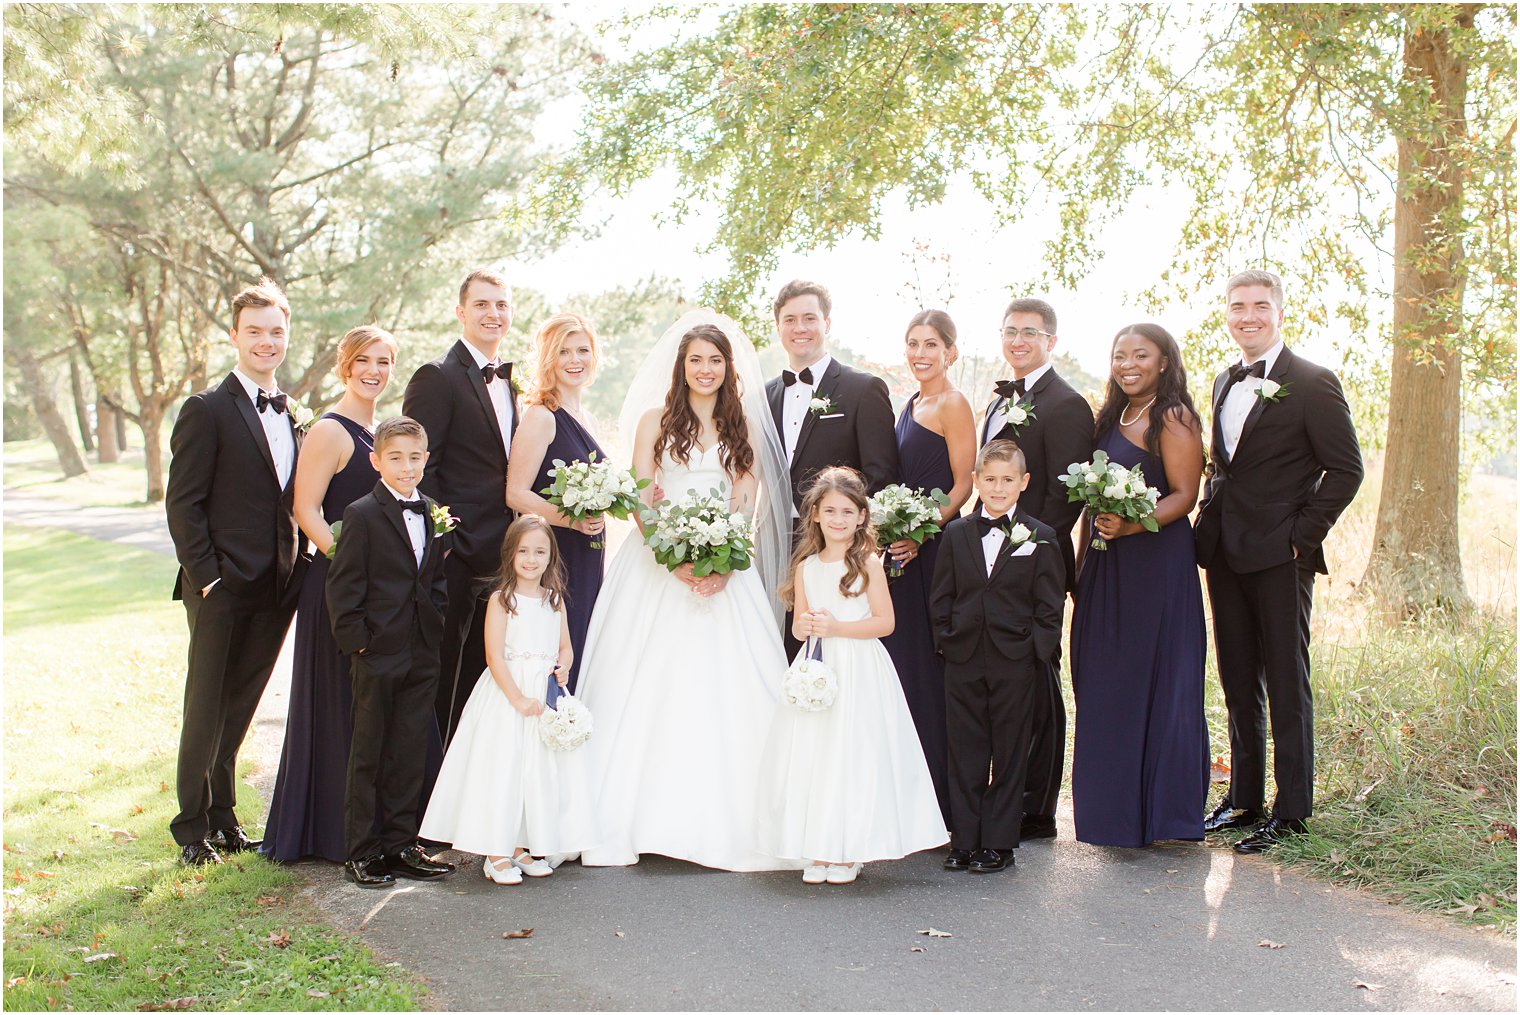 newlyweds pose with wedding party in navy dresses and black tuxes